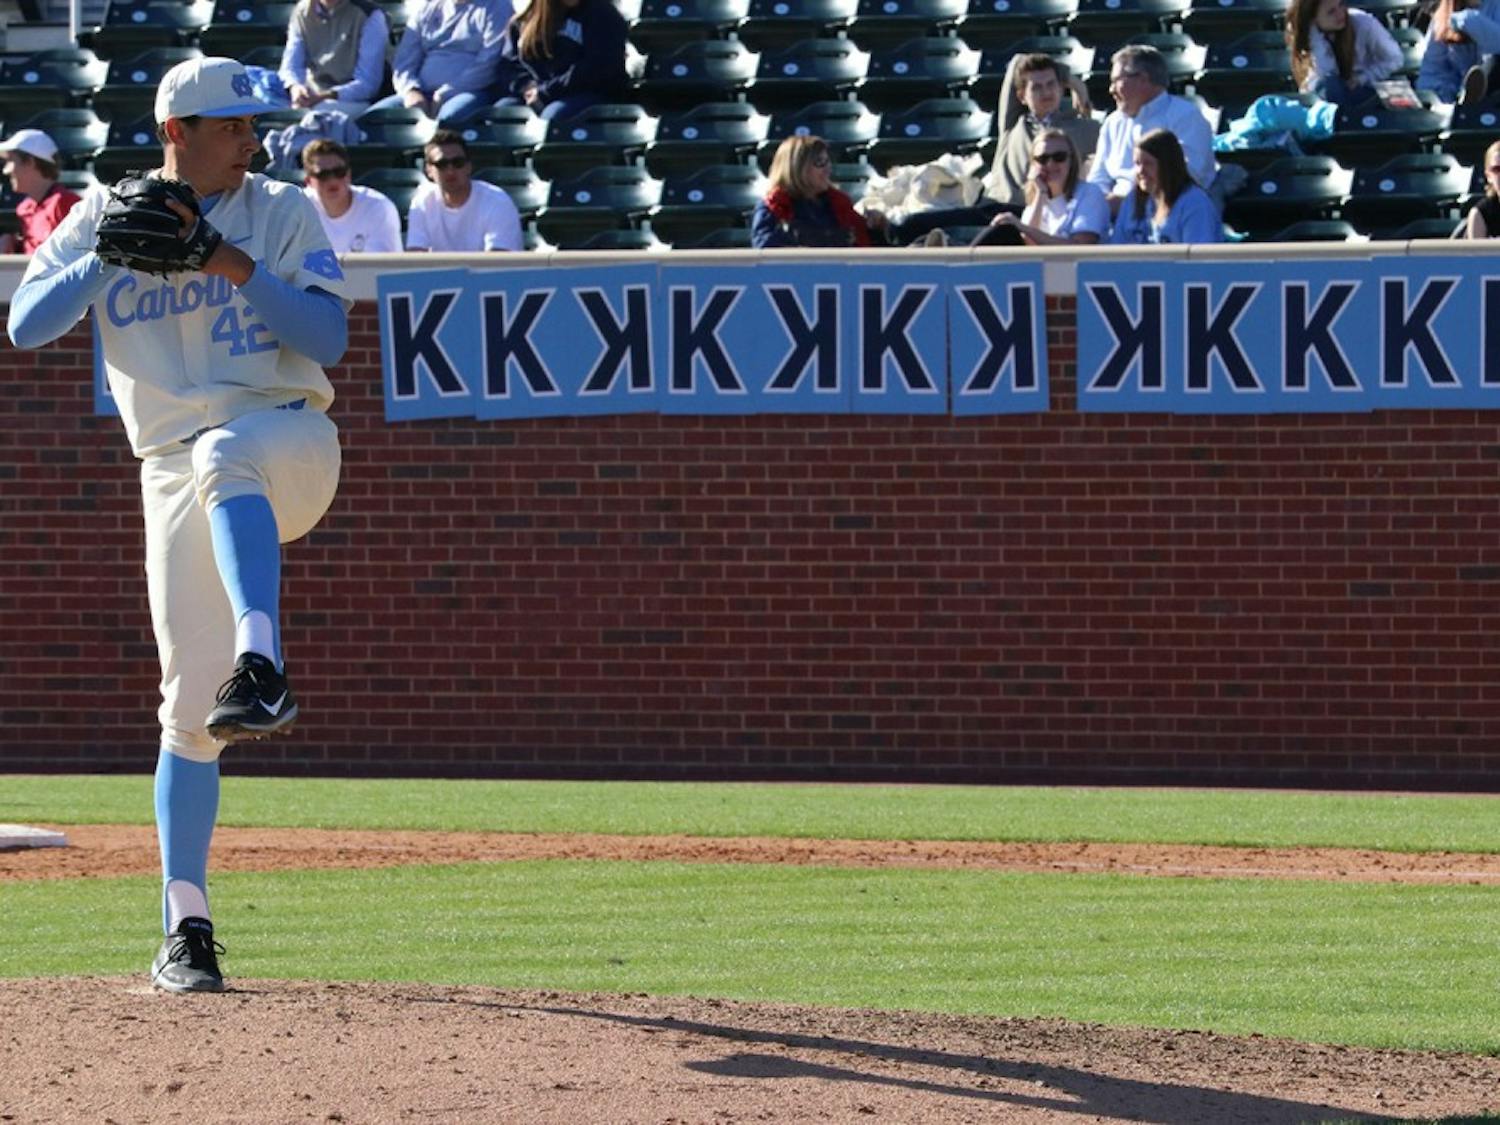 North Carolina pitcher Luca Dalatri (42) struck out 15 batters at Sunday's game against Radford. It was the most strikeouts thrown by a UNC pitcher since Matt Harvey in 2010.